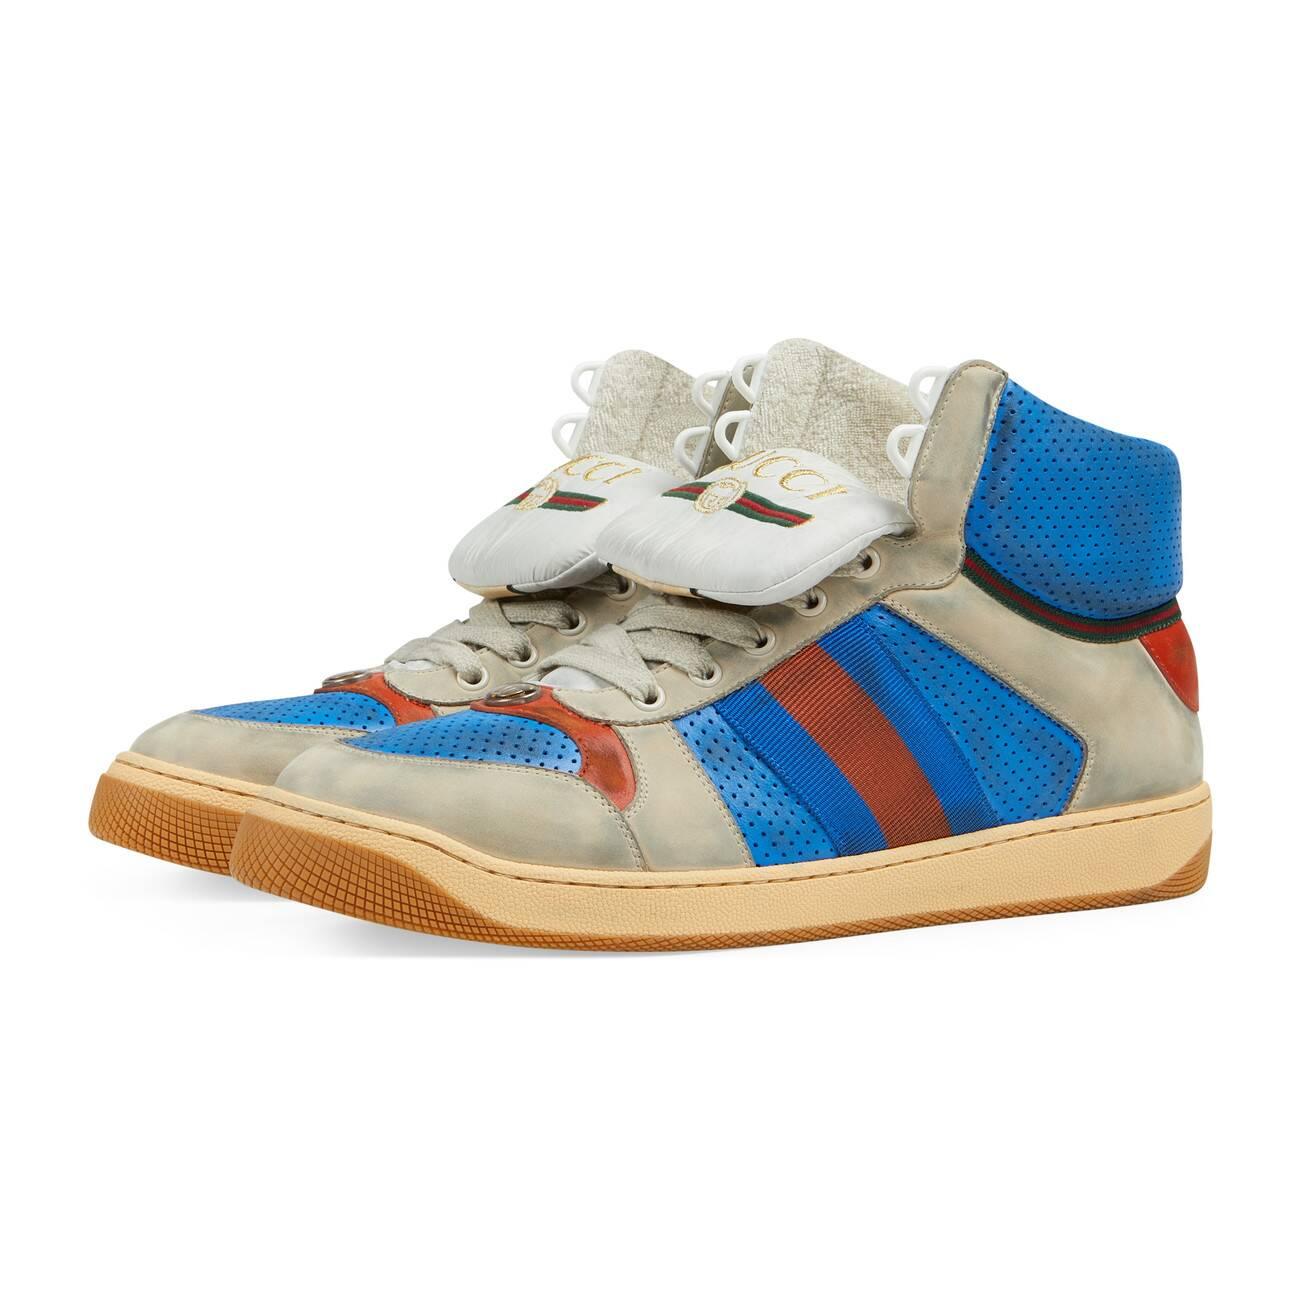 Gucci Leather Men's Screener High-top Sneakers in Blue for Men - Lyst